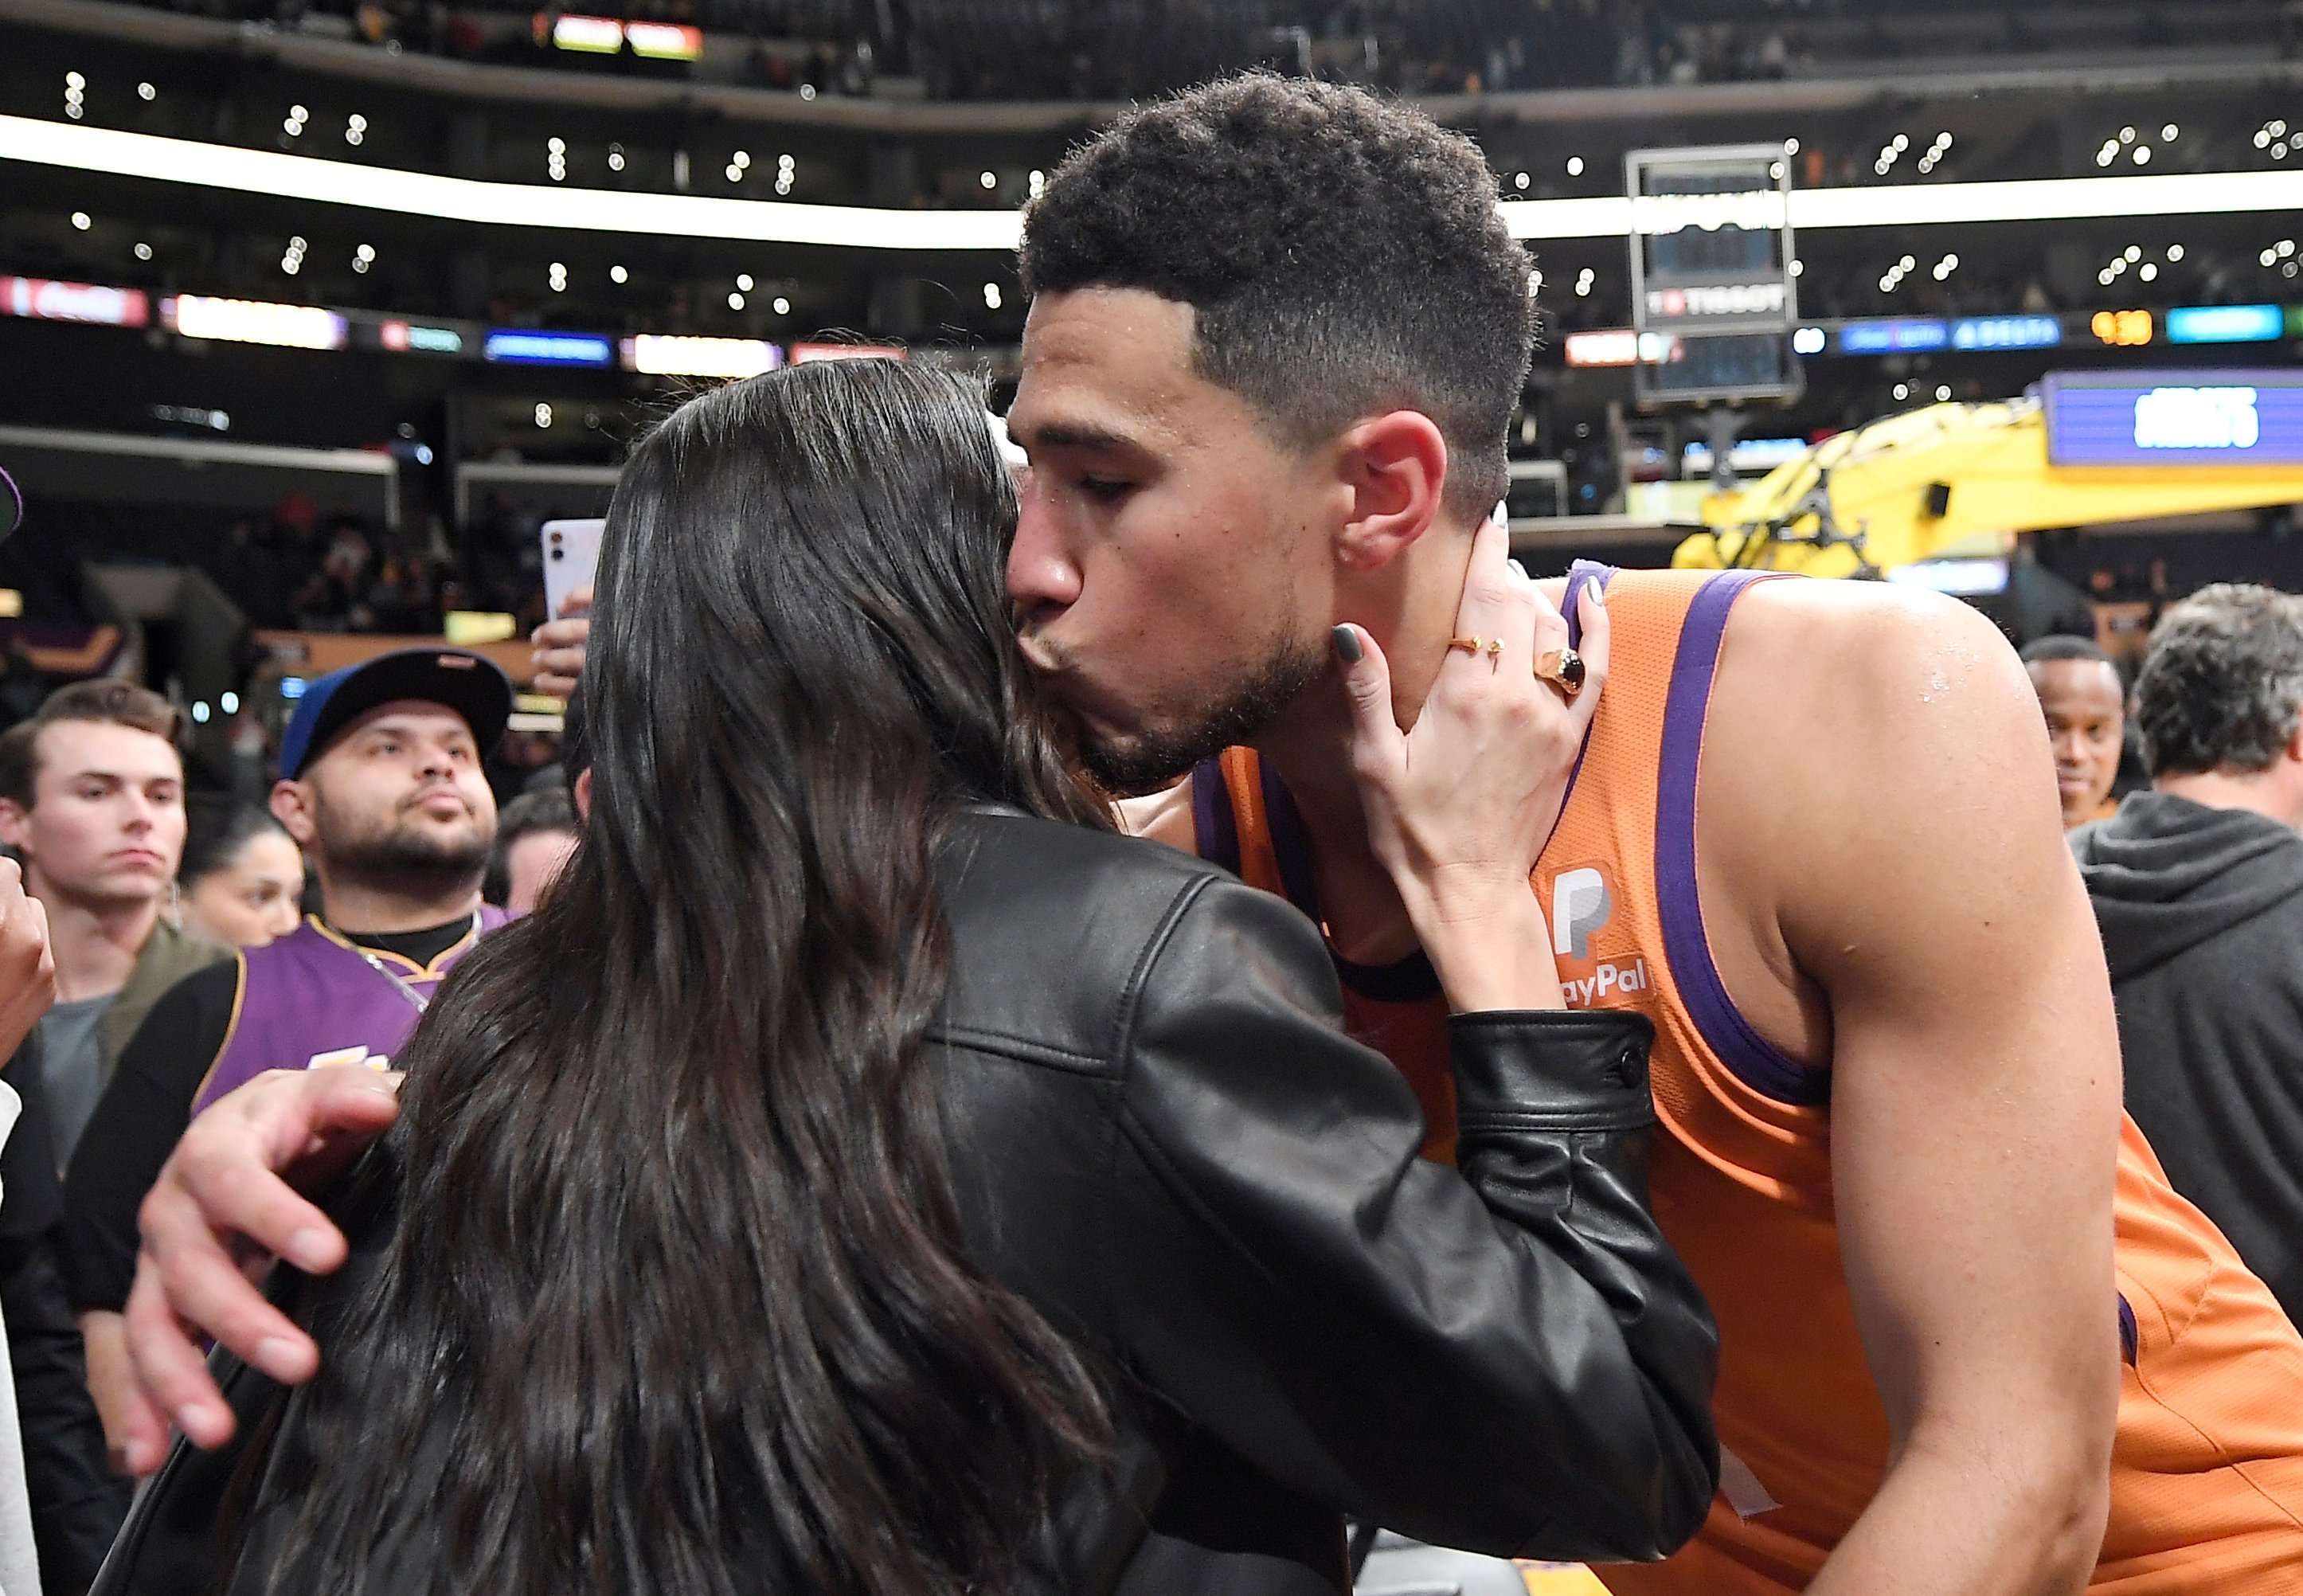 Devin Booker doesn't seem to believe in the Kardashian-Jenner curse as he kisses and hugs Kendall Jenner after a Suns game